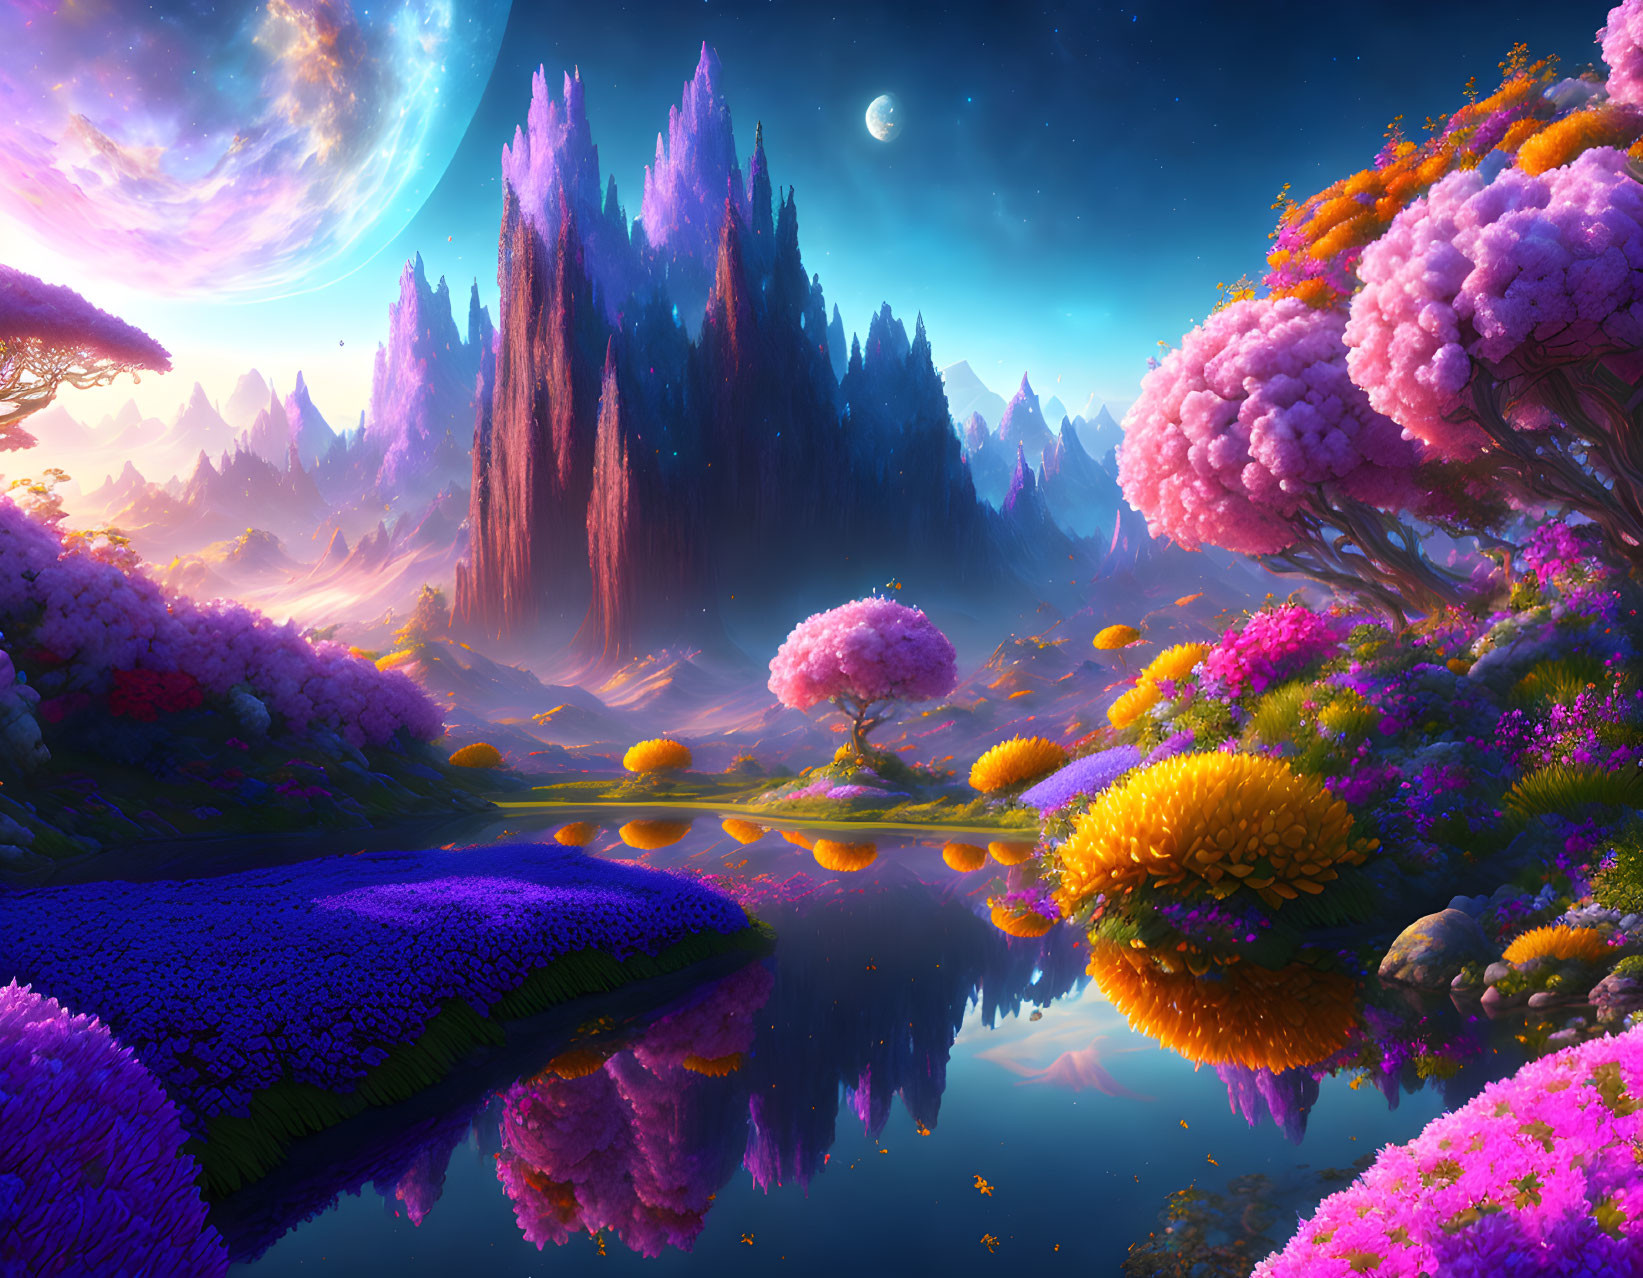 Colorful Fantasy Landscape with Moon, Lake, and Mountains